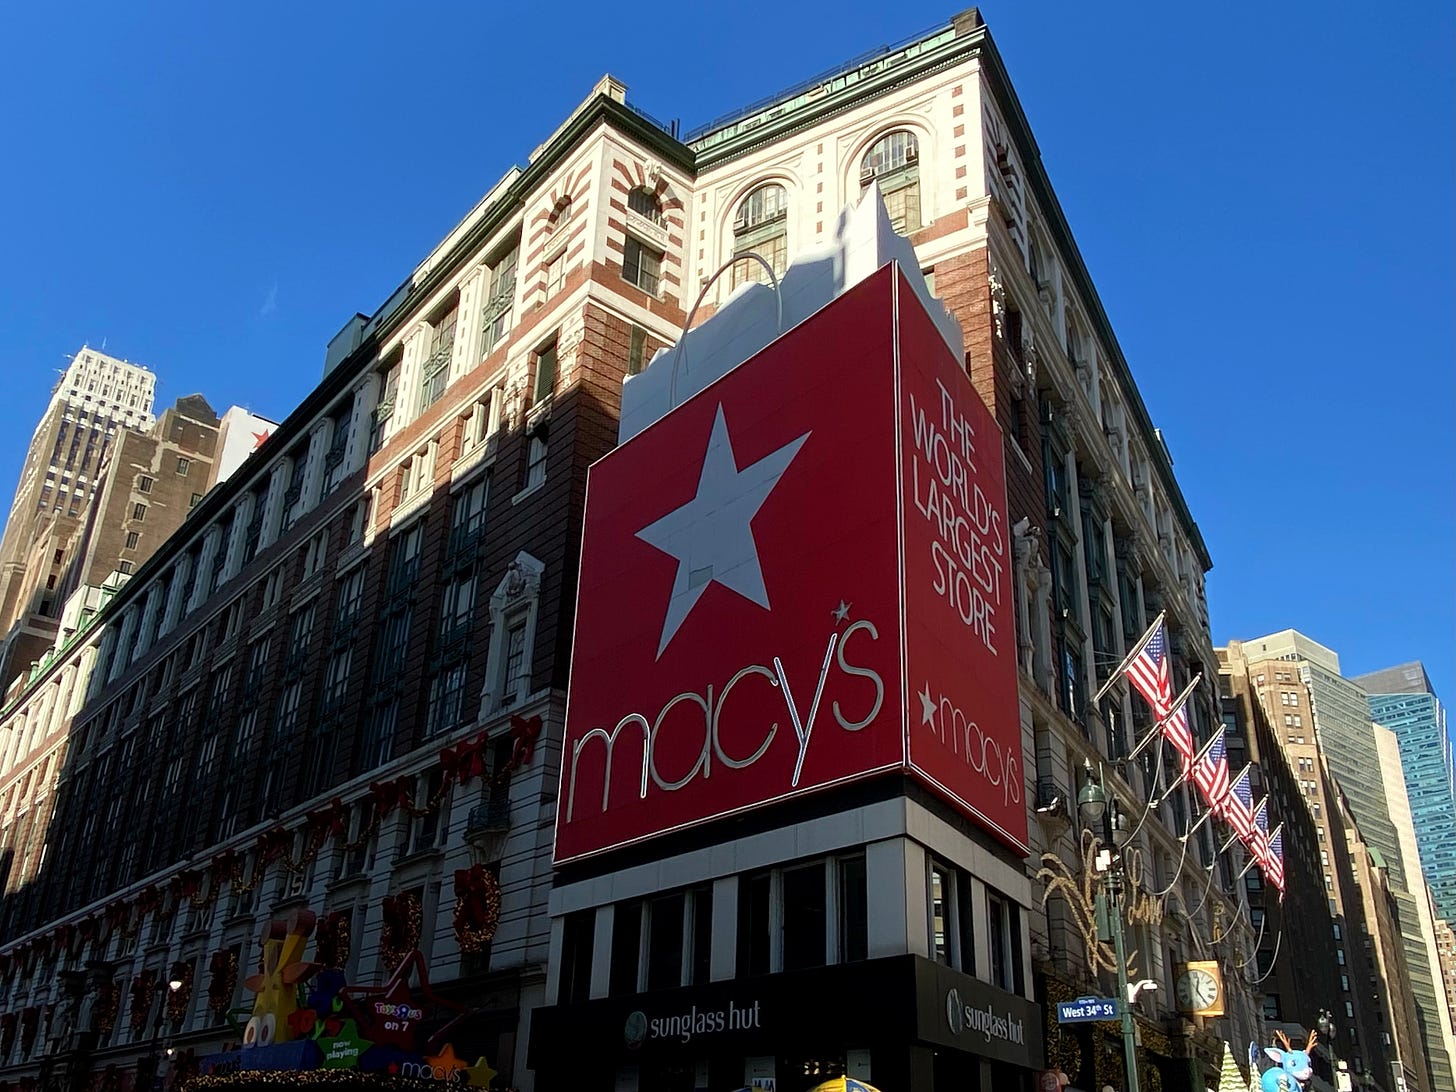 The corner of 34th and Broadway. The Macy's building is clearly designed around a carved out corner lot, currently housing a Sunglasses Hut. There is a large billboard in the shape of a Macy's shopping bag above it.